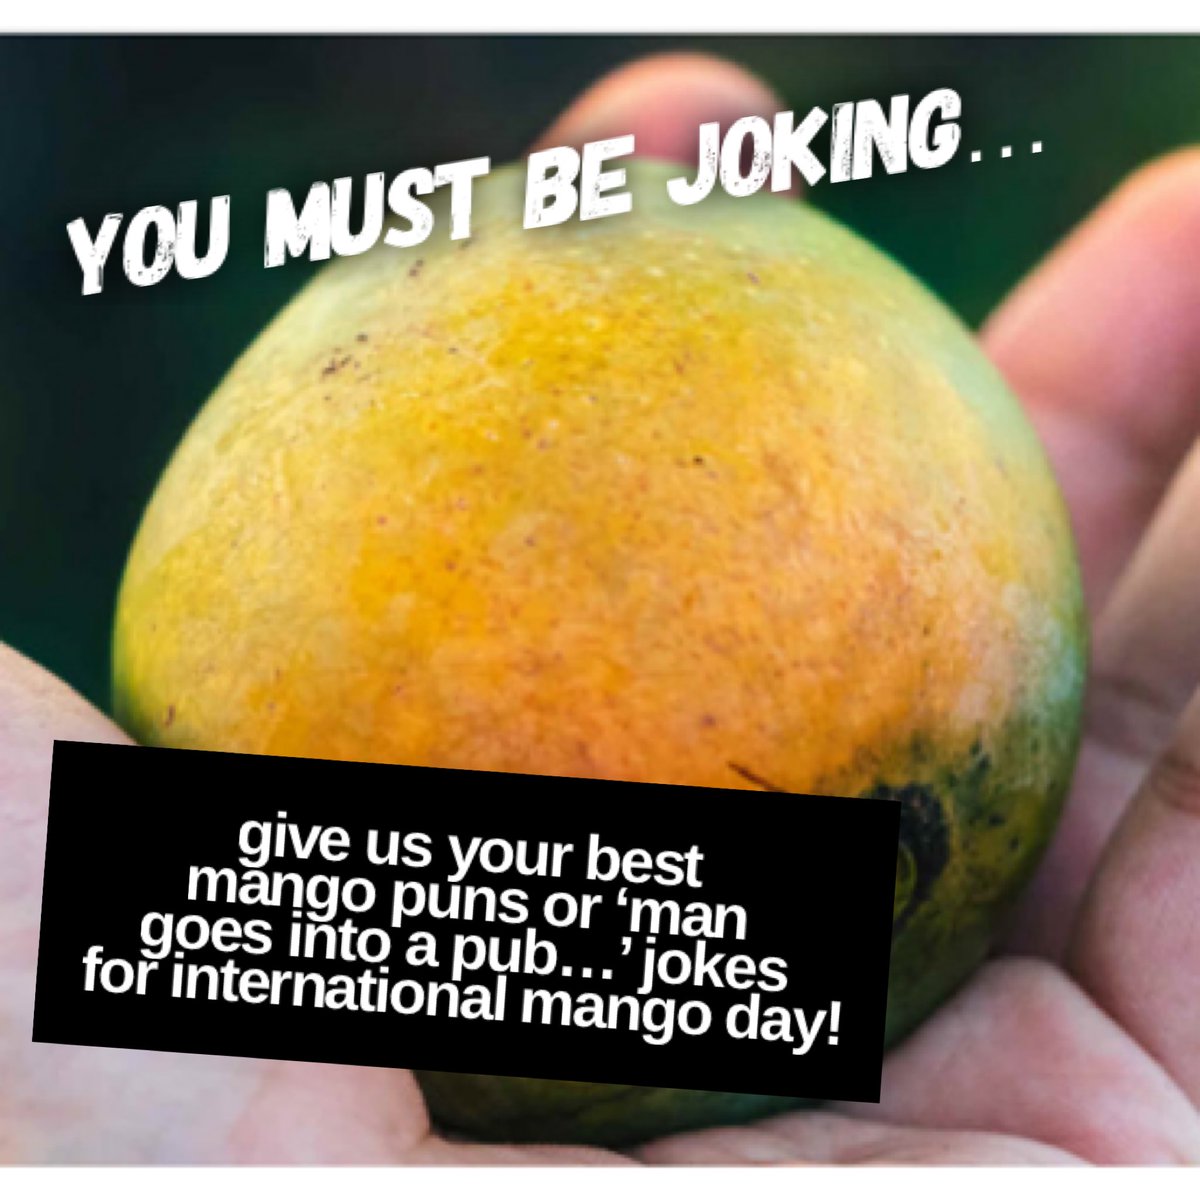 It’s #internationalmangoday! Send me your mango puns or ‘man goes into a pub/bar’ jokes. I’ll read some out live on air between 4-6pm. Keep it clean! 😉 #jokes #puns